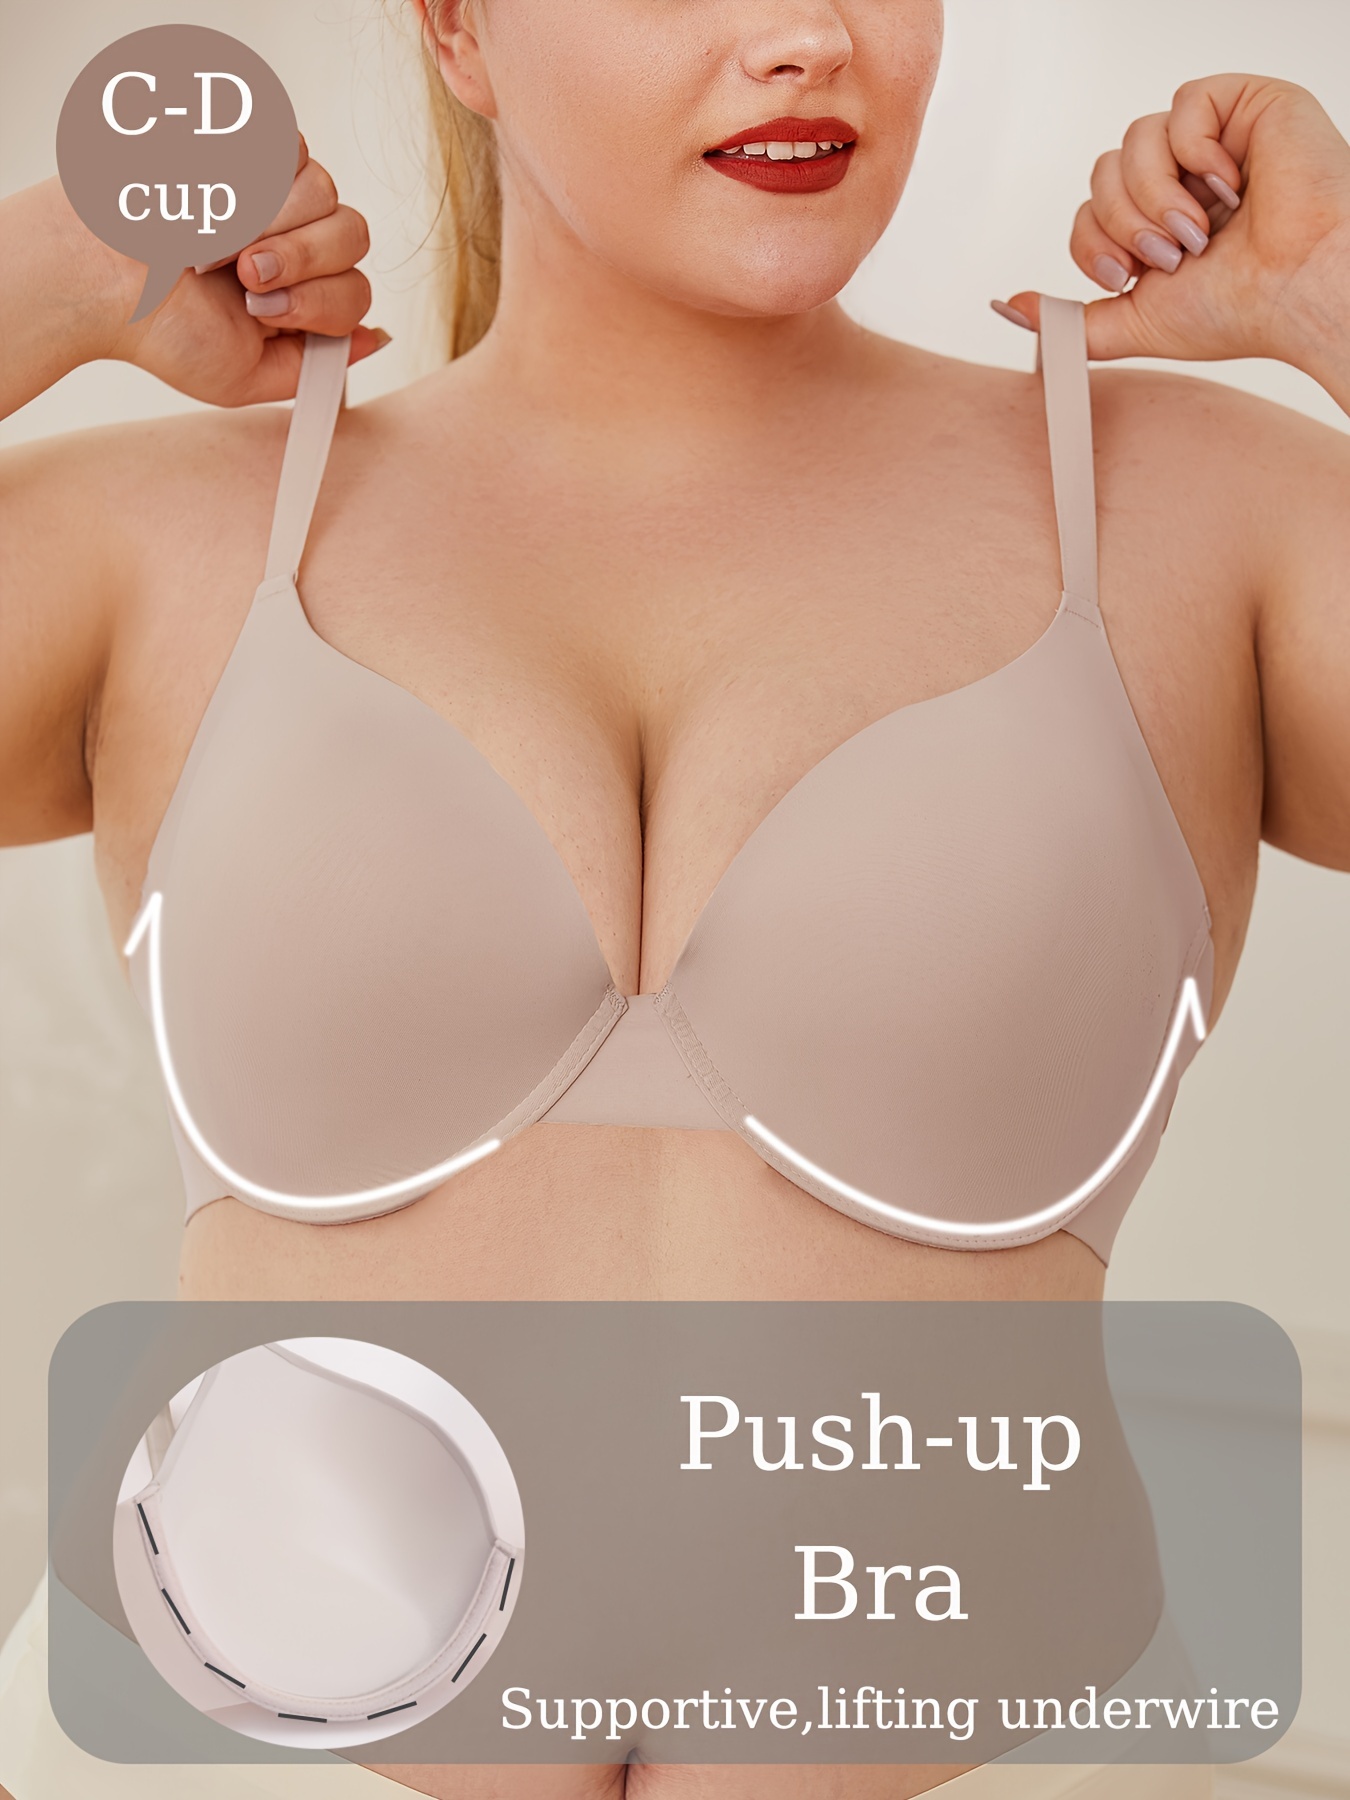 6Pcs Bra Pads Inserts Round Push up Soft Sew in Removable Bra Cups Breast